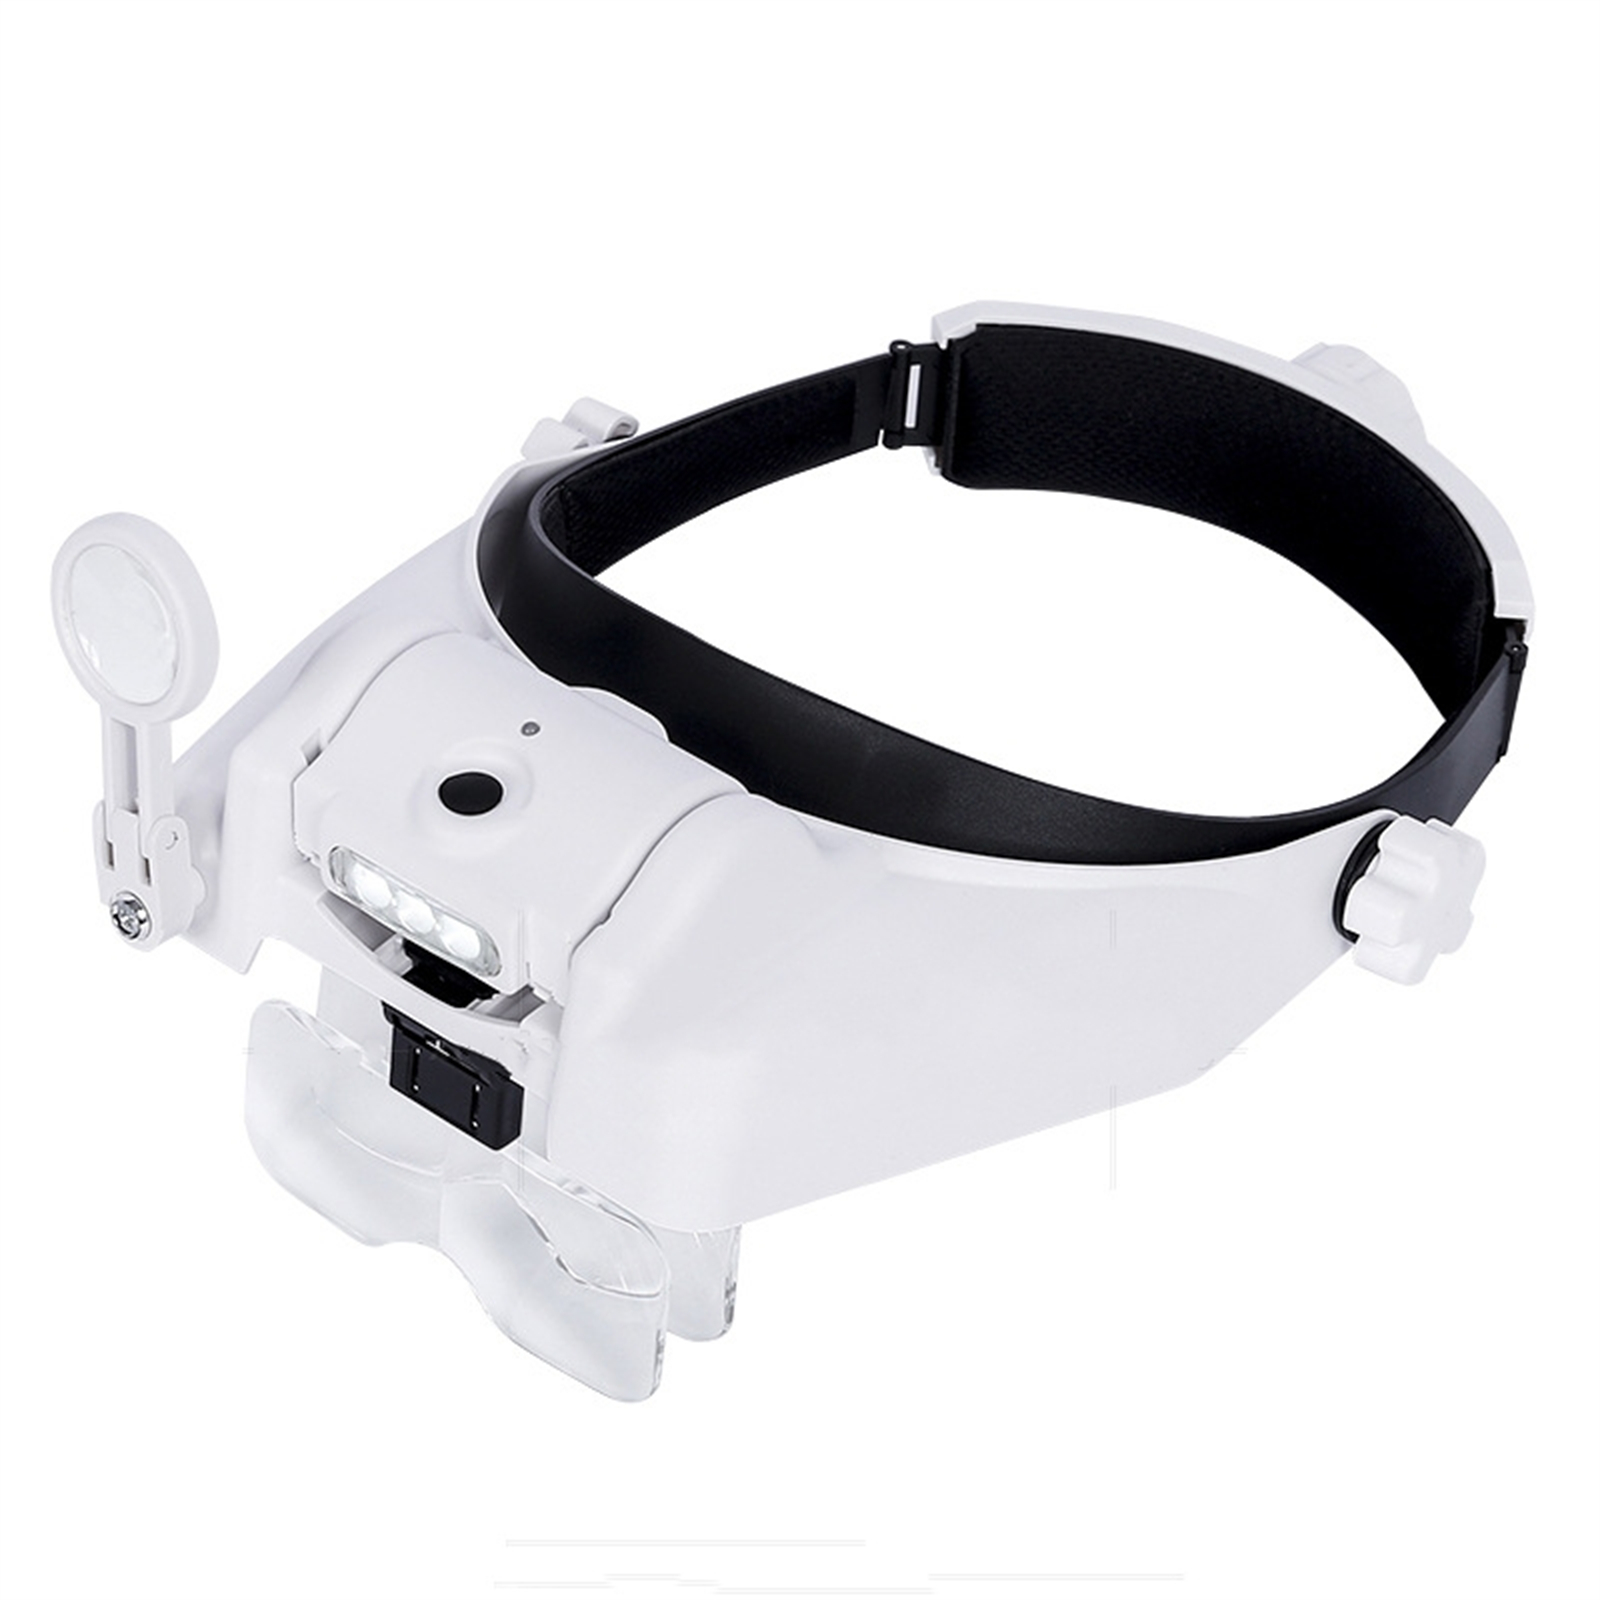 31 Multiples Magnifying Glass with 3led Lights Long Standby Lightweight Head-mounted Reading Magnifier